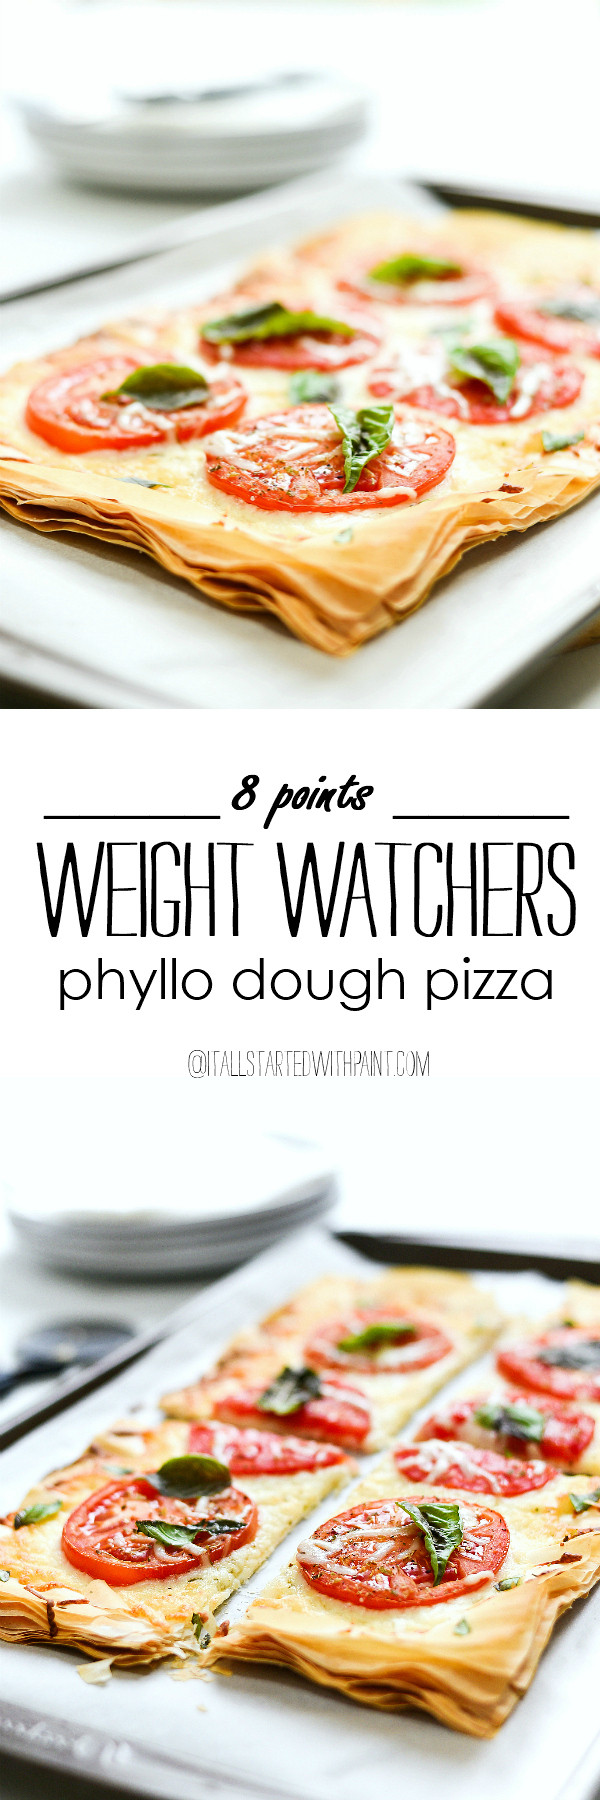 Weight Watchers Pizza Dough
 Weight Watchers Pizza Recipe It All Started With Paint